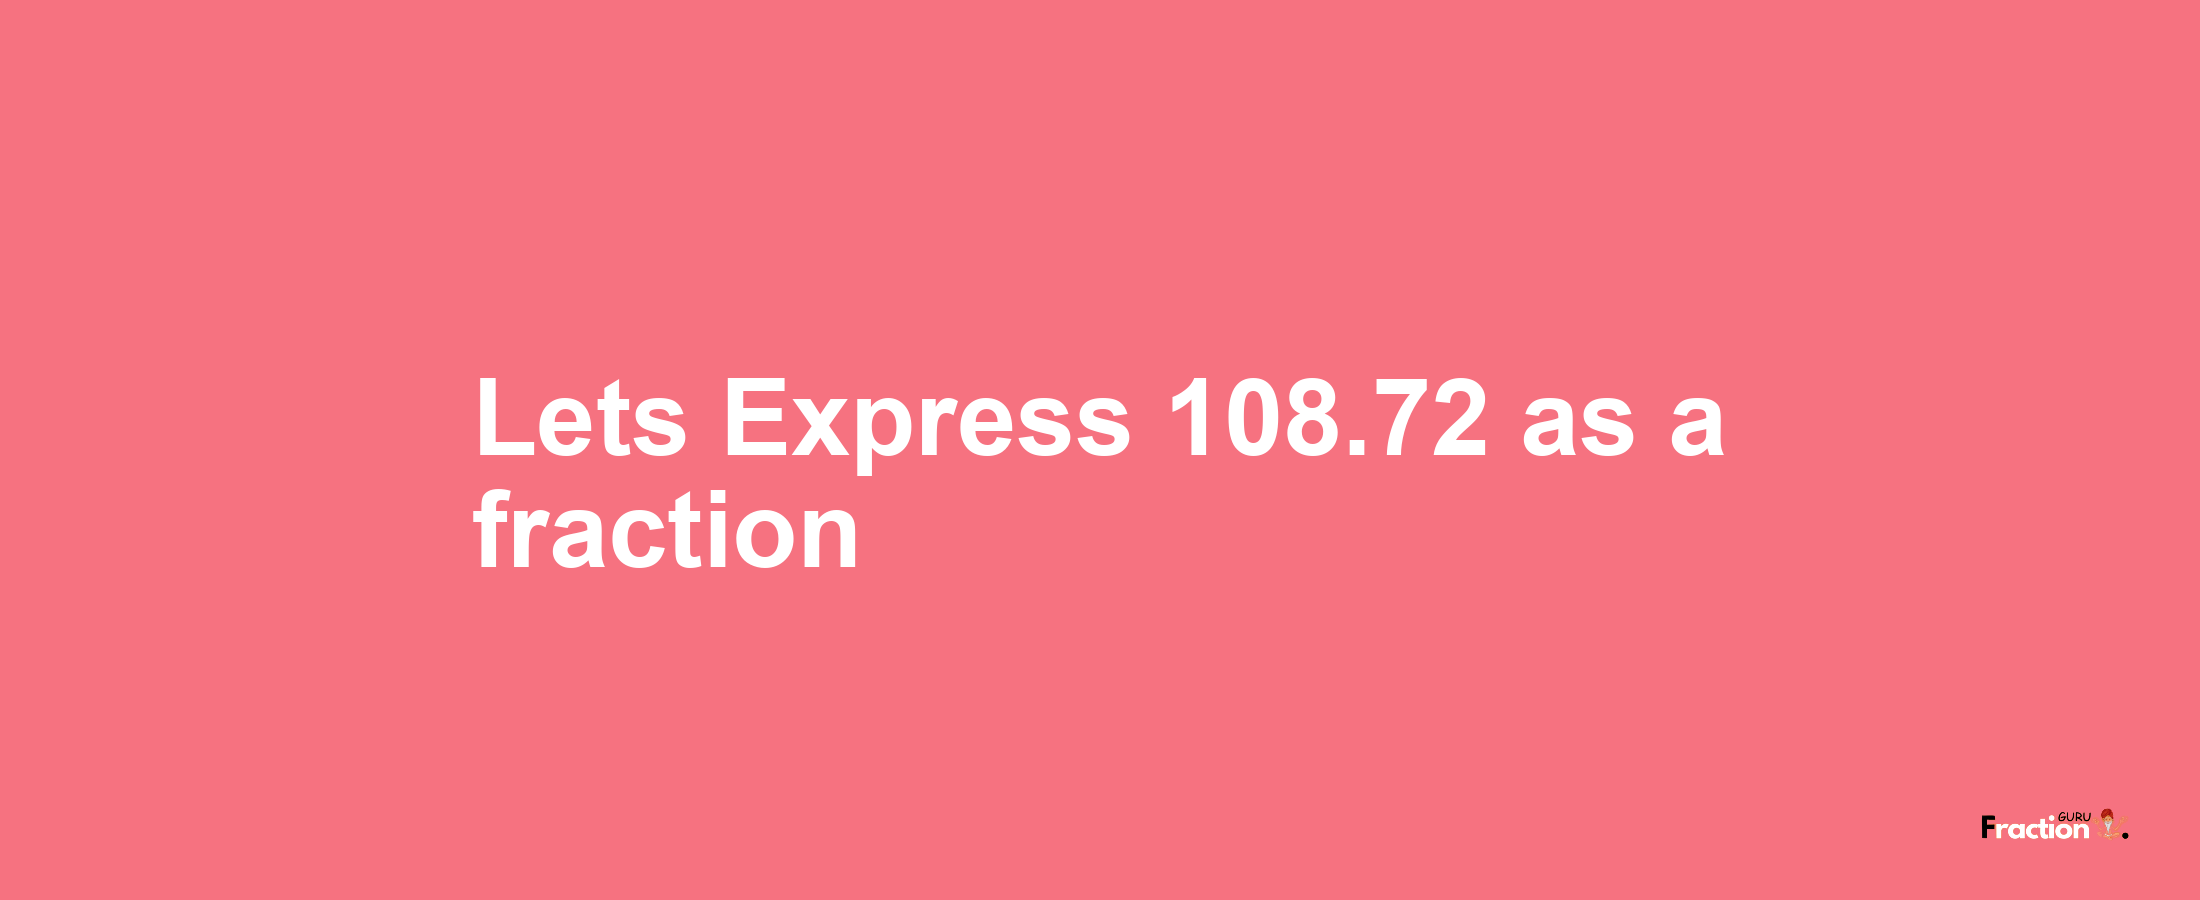 Lets Express 108.72 as afraction